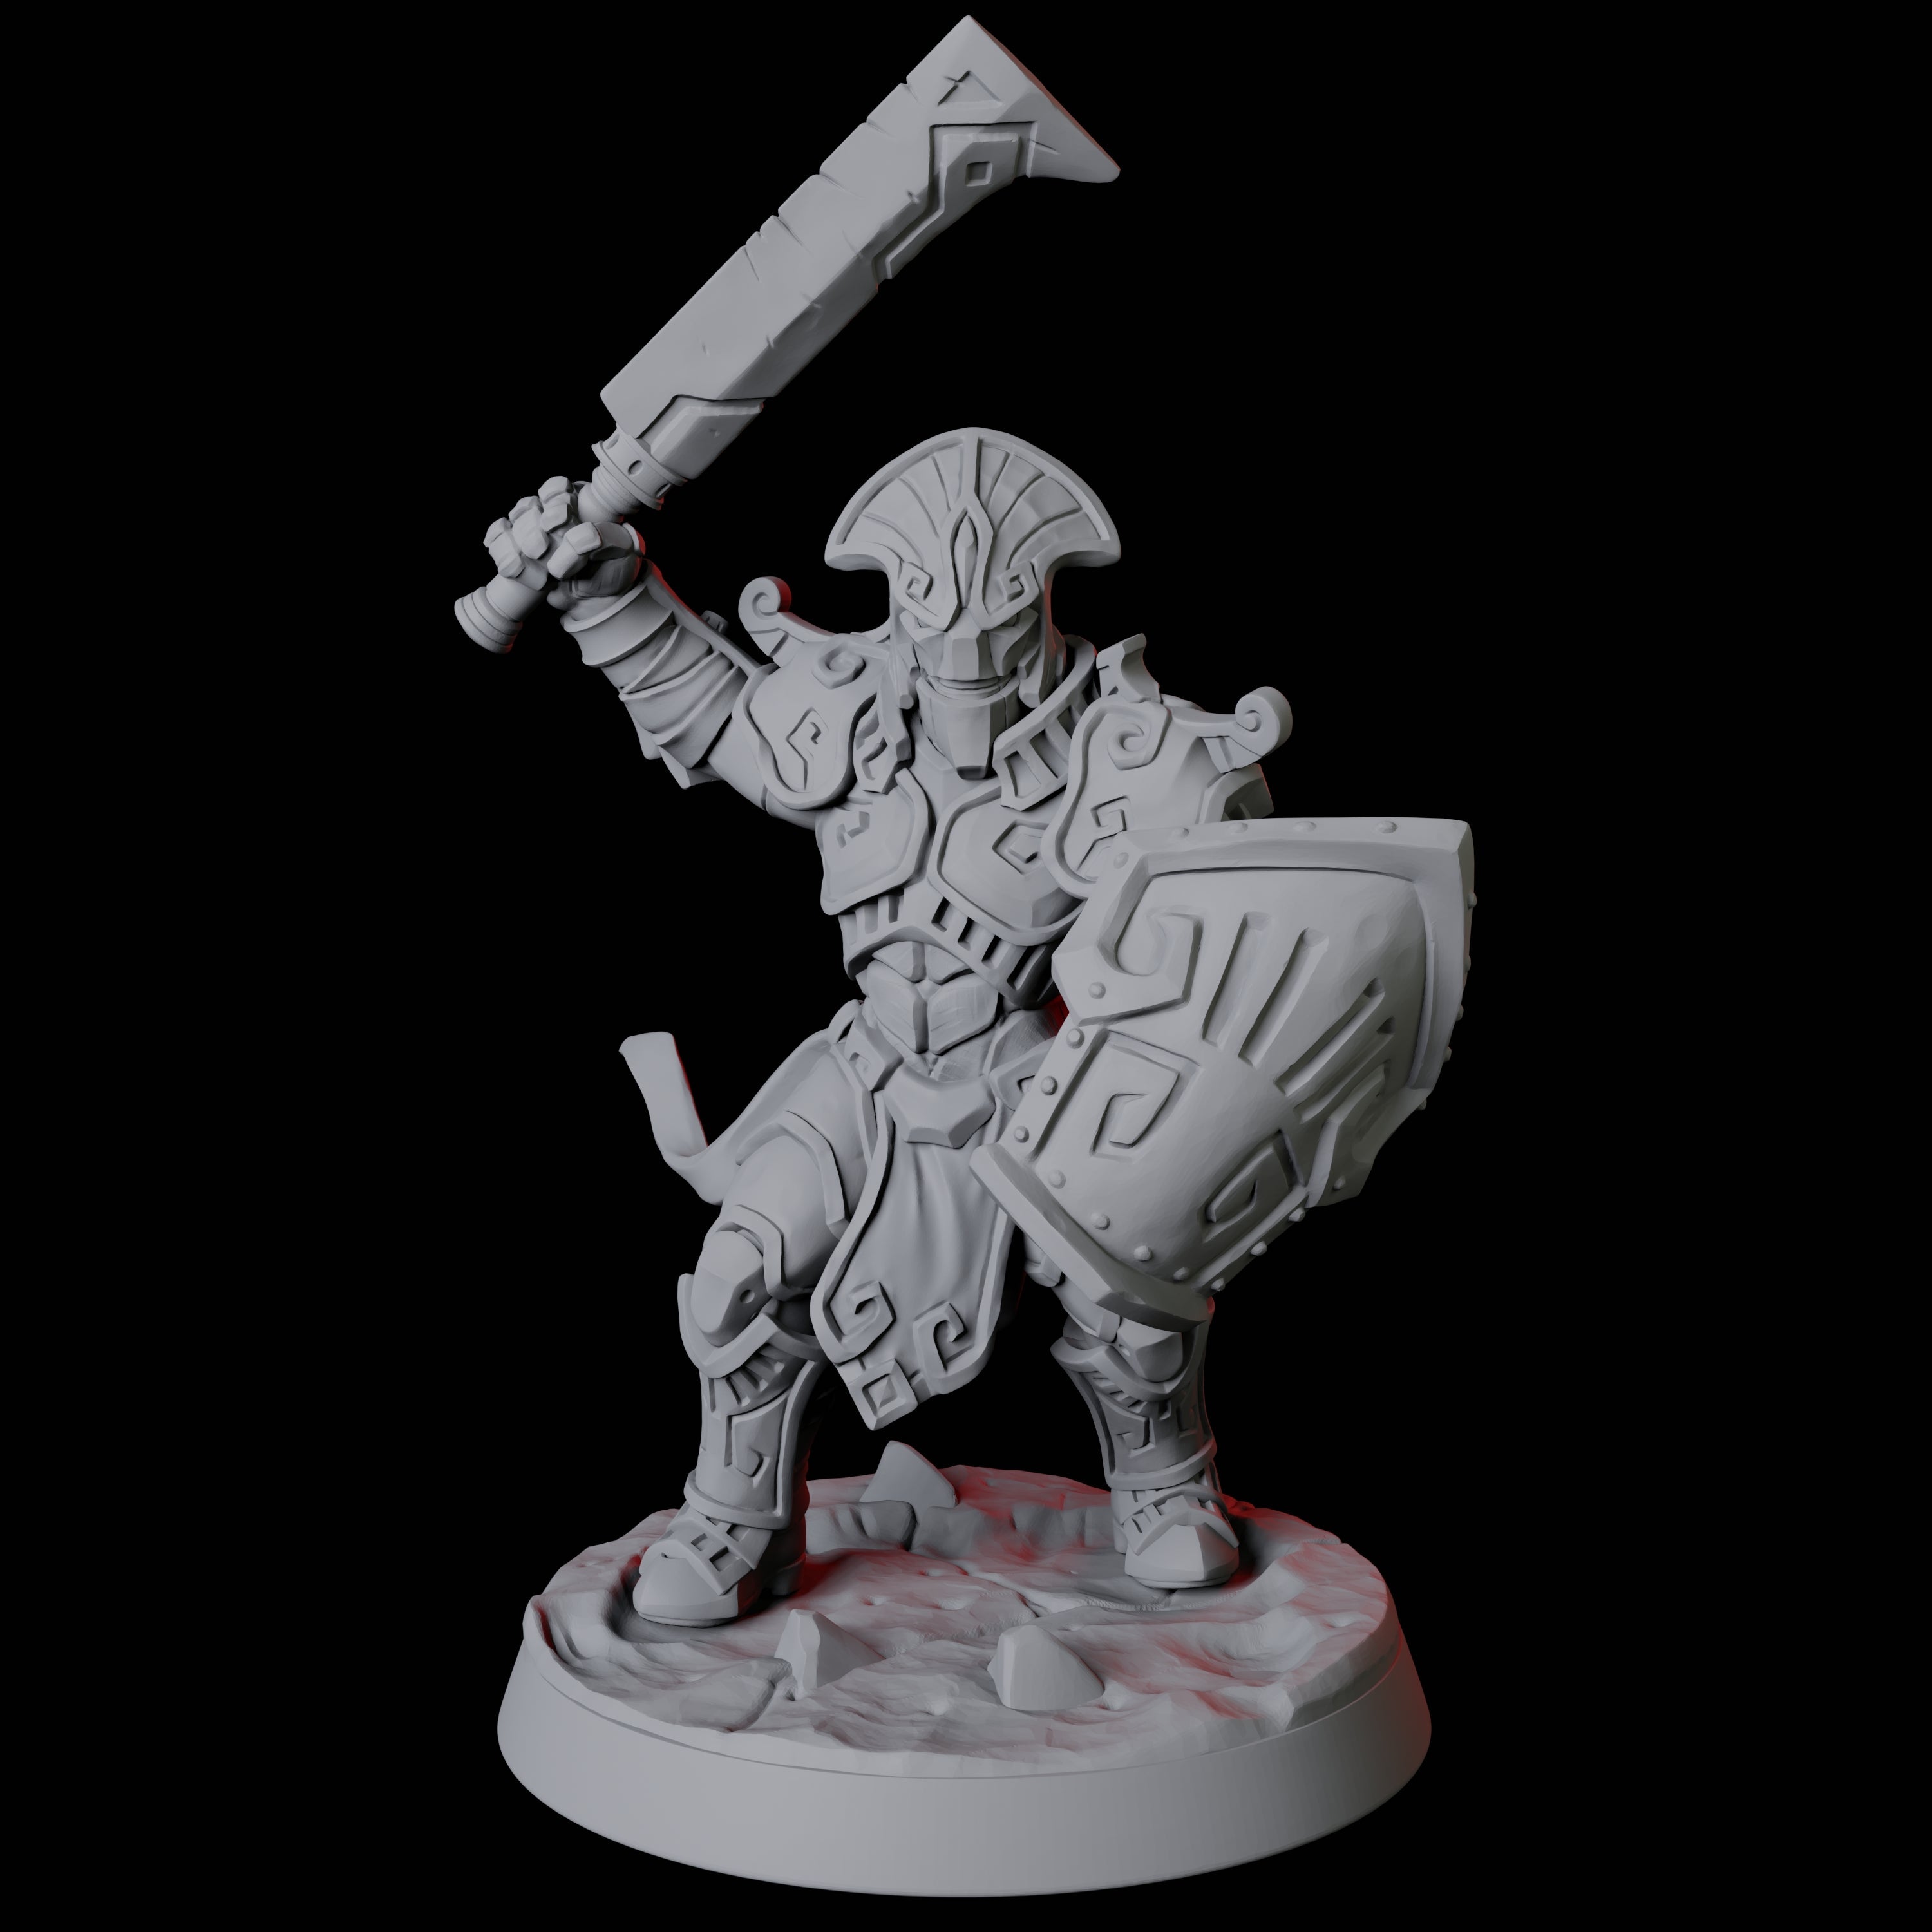 Battle-Ready Warforged A Miniature for Dungeons and Dragons, Pathfinder or other TTRPGs